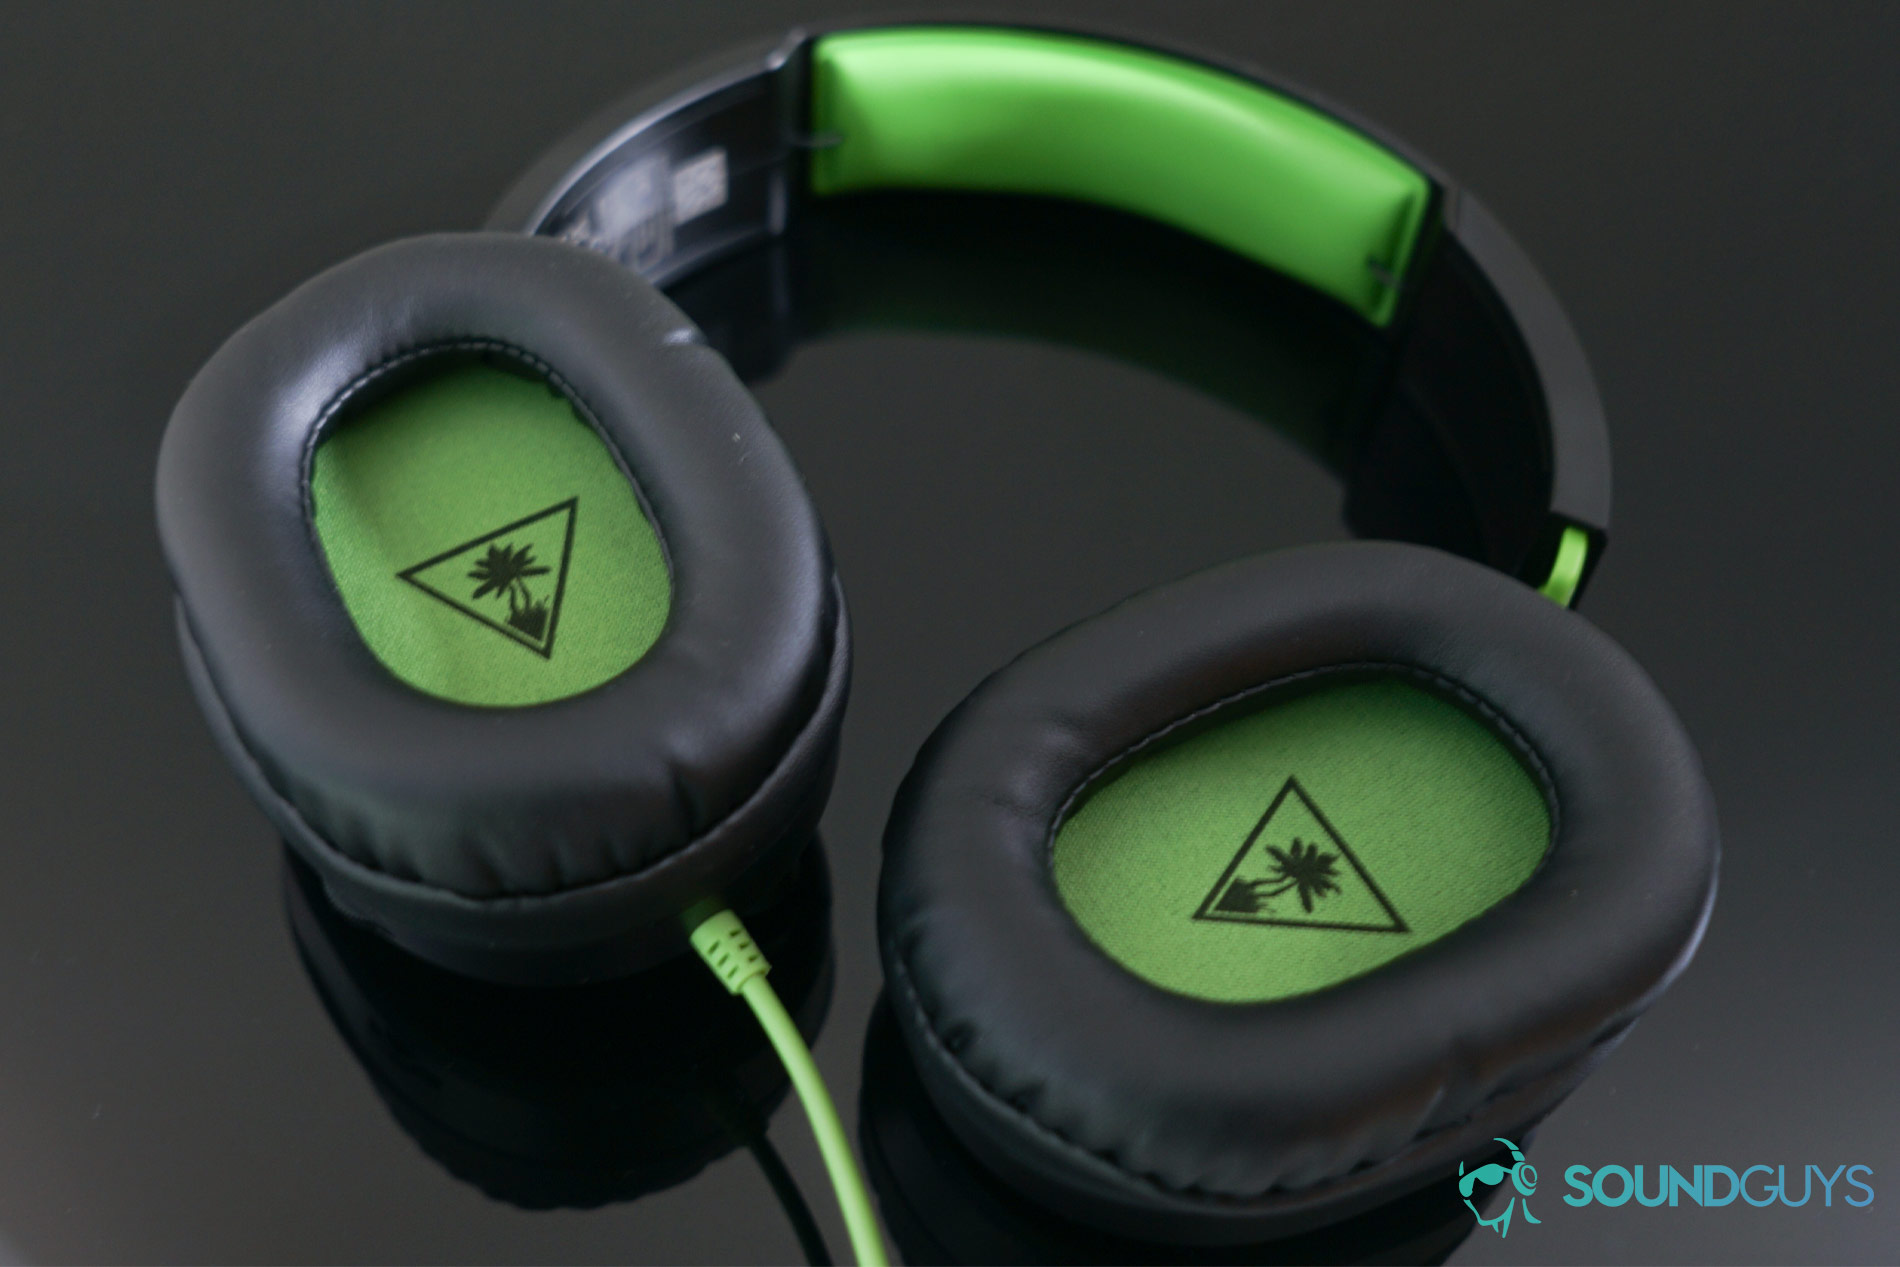 The Turtle Beach Recon 70 gaming headset's ear cups which are lined with a green material that matches the headband.